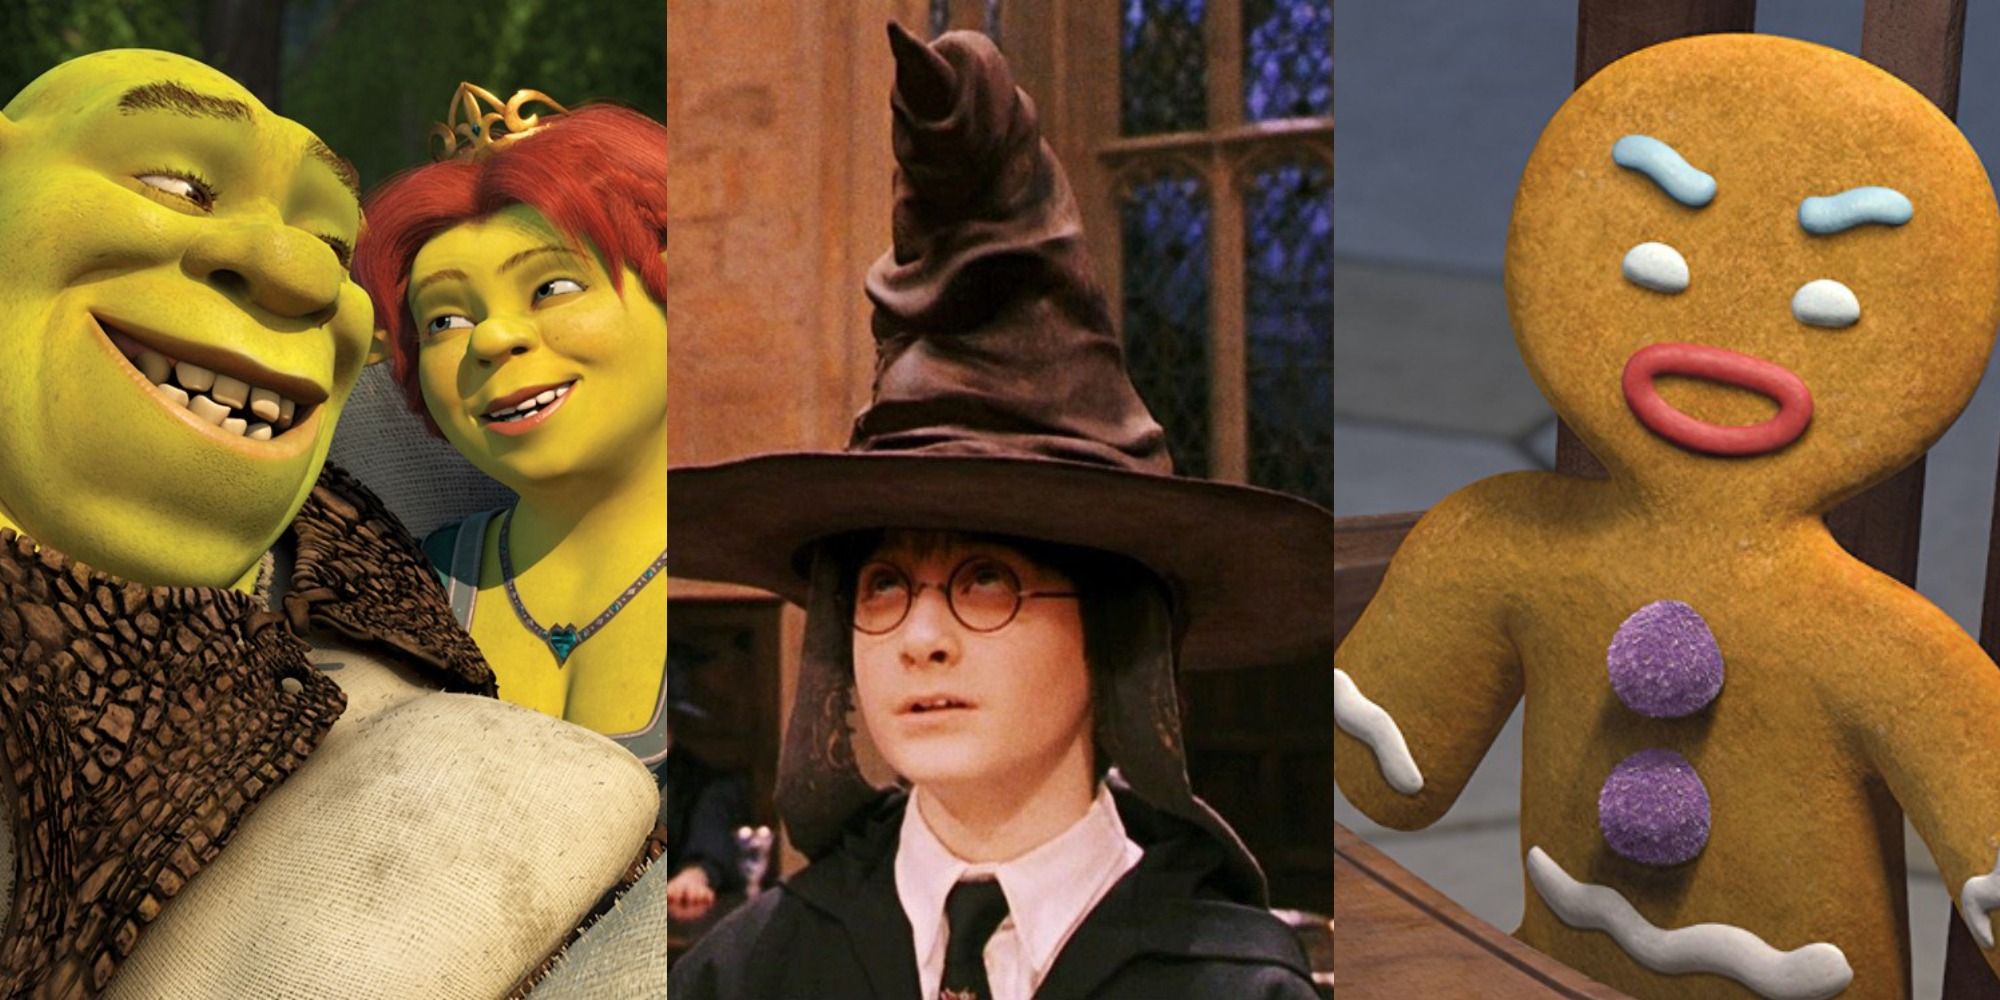 Shrek and Fiona, Harry Potter in the sorting hat, and Gingy from Shrek